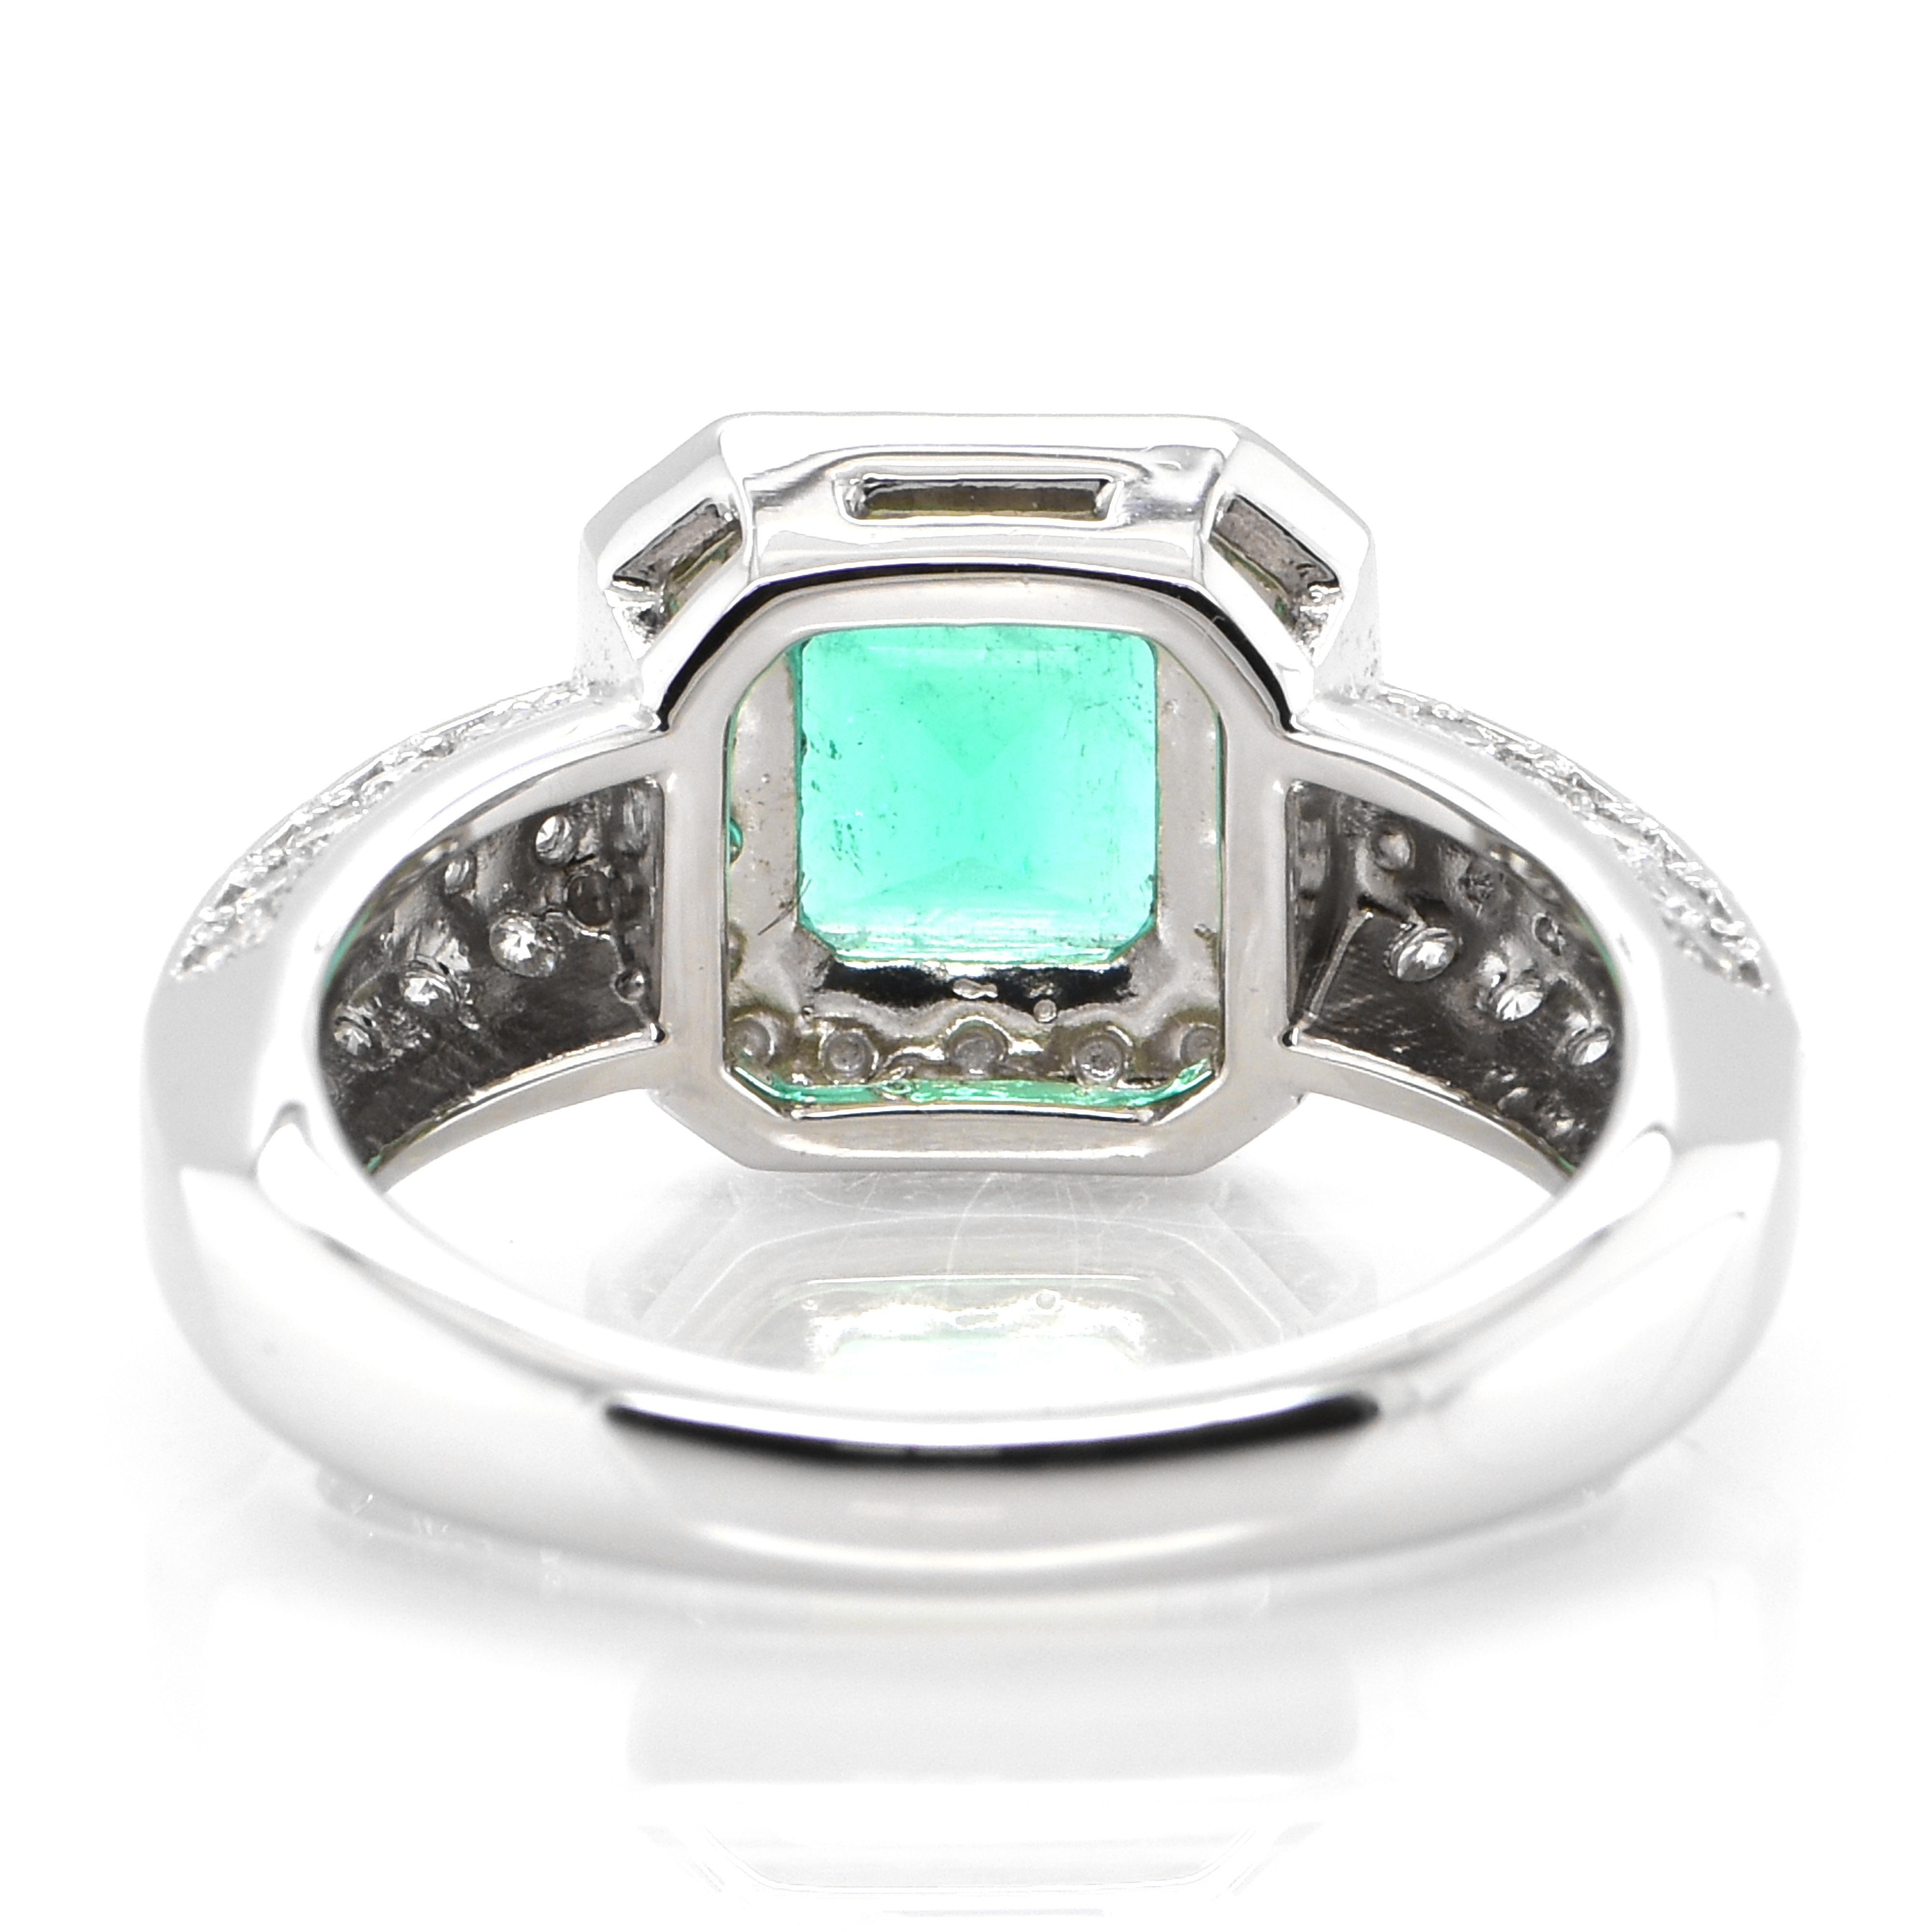 Women's 1.58 Carat Natural Colombian Emerald and Diamond Ring Set in Platinum For Sale